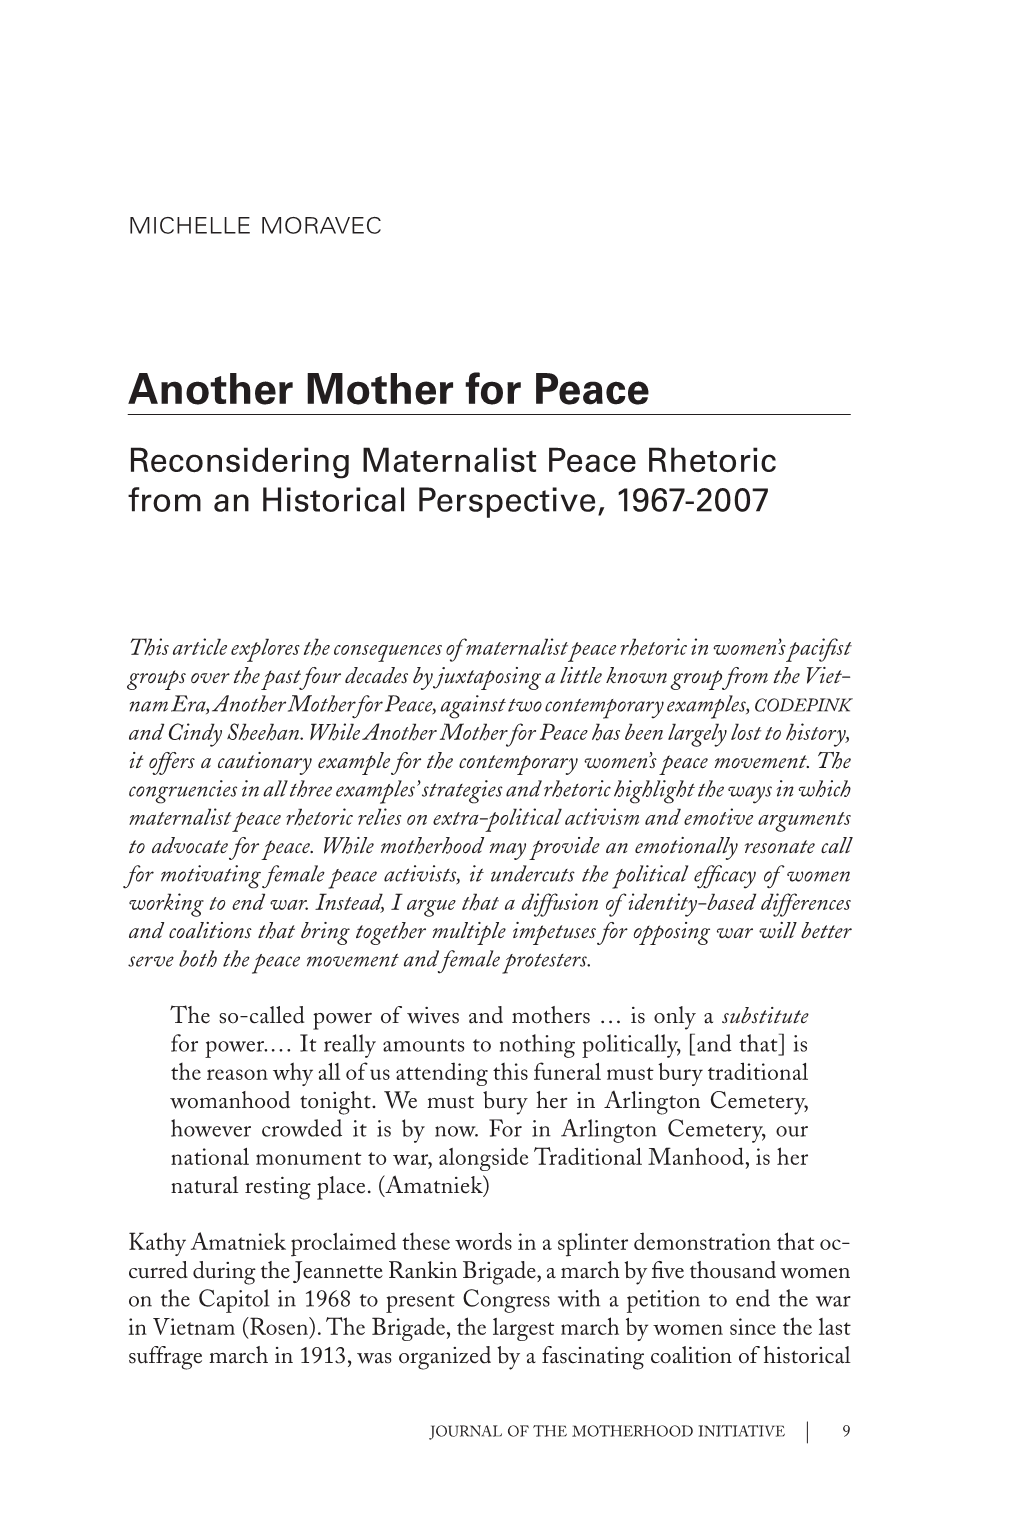 Another Mother for Peace Reconsidering Maternalist Peace Rhetoric from an Historical Perspective, 1967-2007